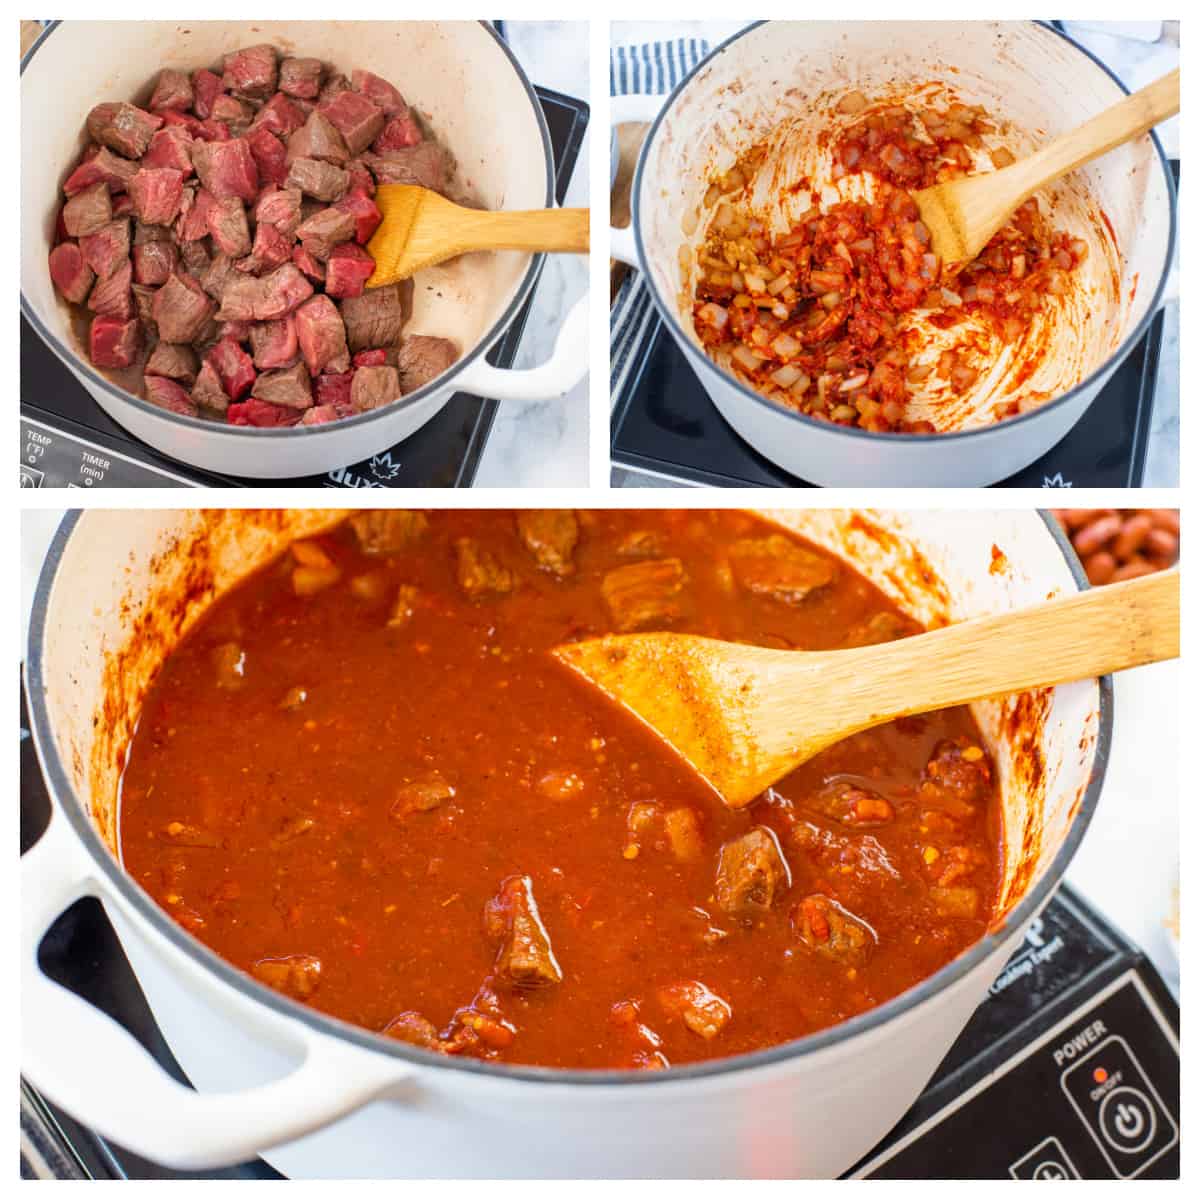 Collage showing how to make steak chili.